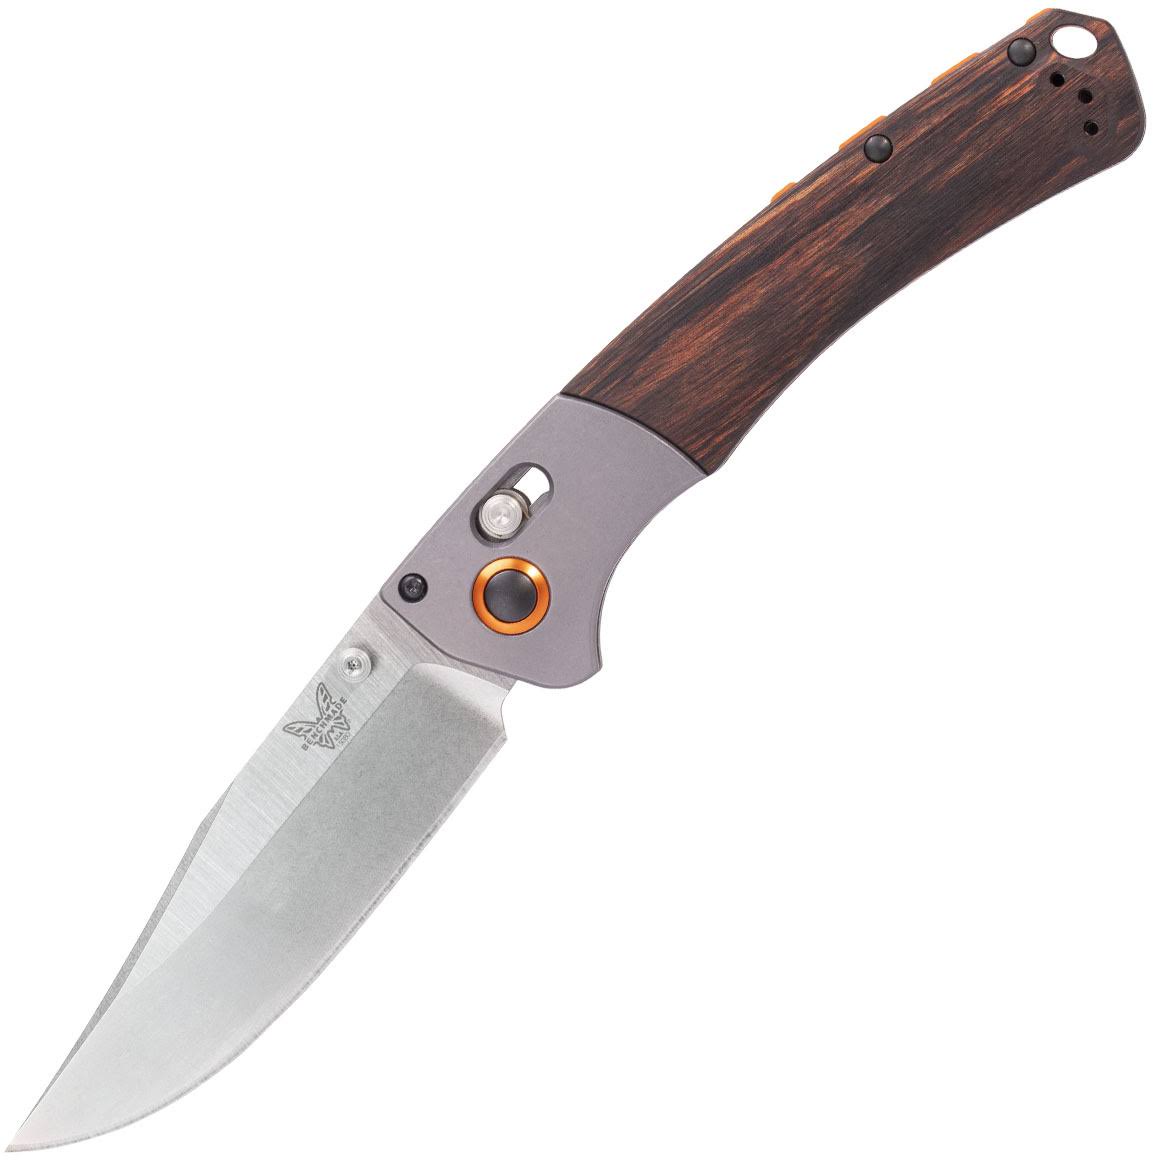 Benchmade Crooked River 15080 Knife - Drop-Point, Stabilized Wood Handle